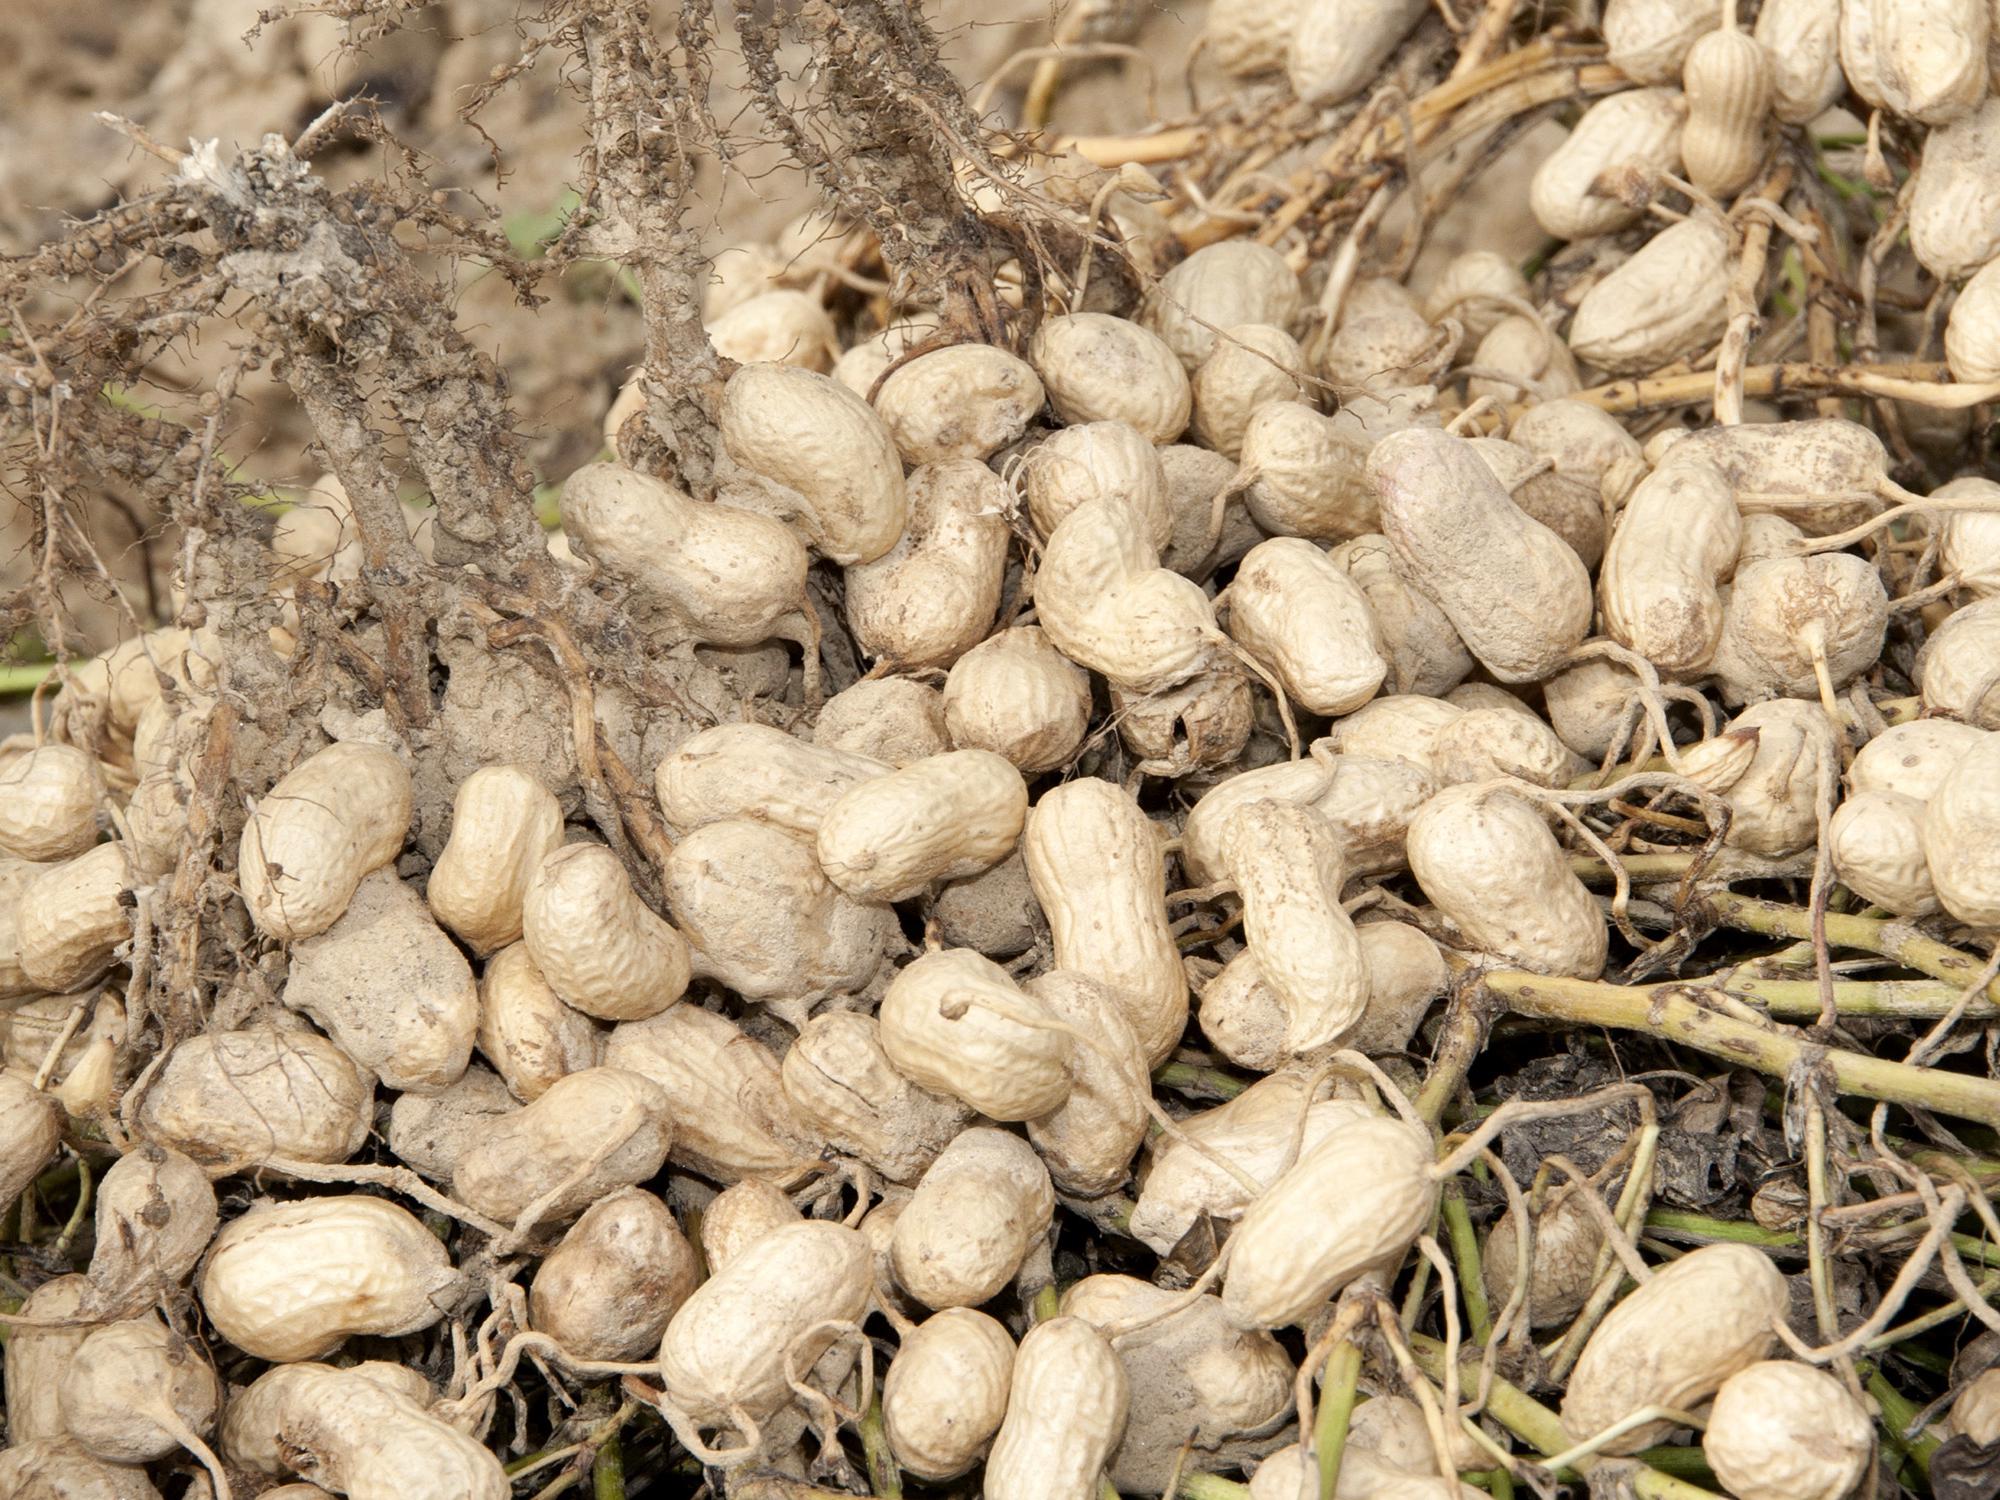 These 2012 peanuts from Mississippi's record crop are a distant memory as lower prices are prompting growers to reduce acres 58 percent from 52,000 last year to about 22,000 acres in 2013. (Photo by MSU Ag Communications/Kat Lawrence)